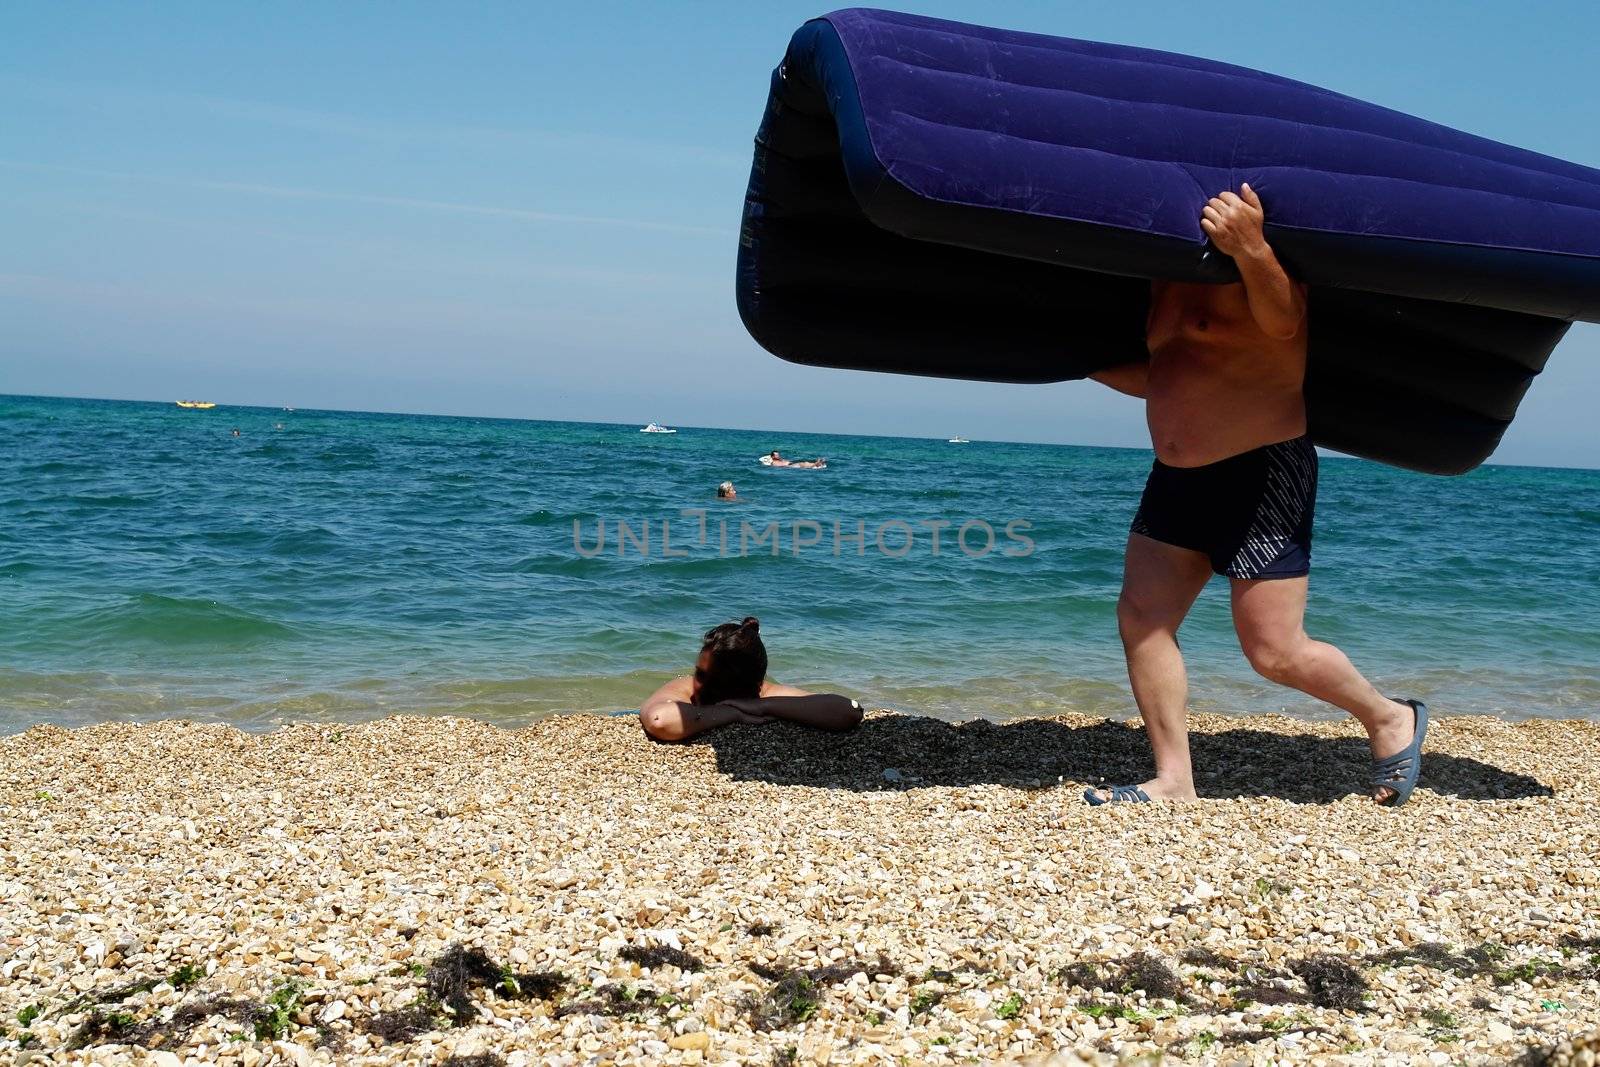 The person transfers a mattress to a beach